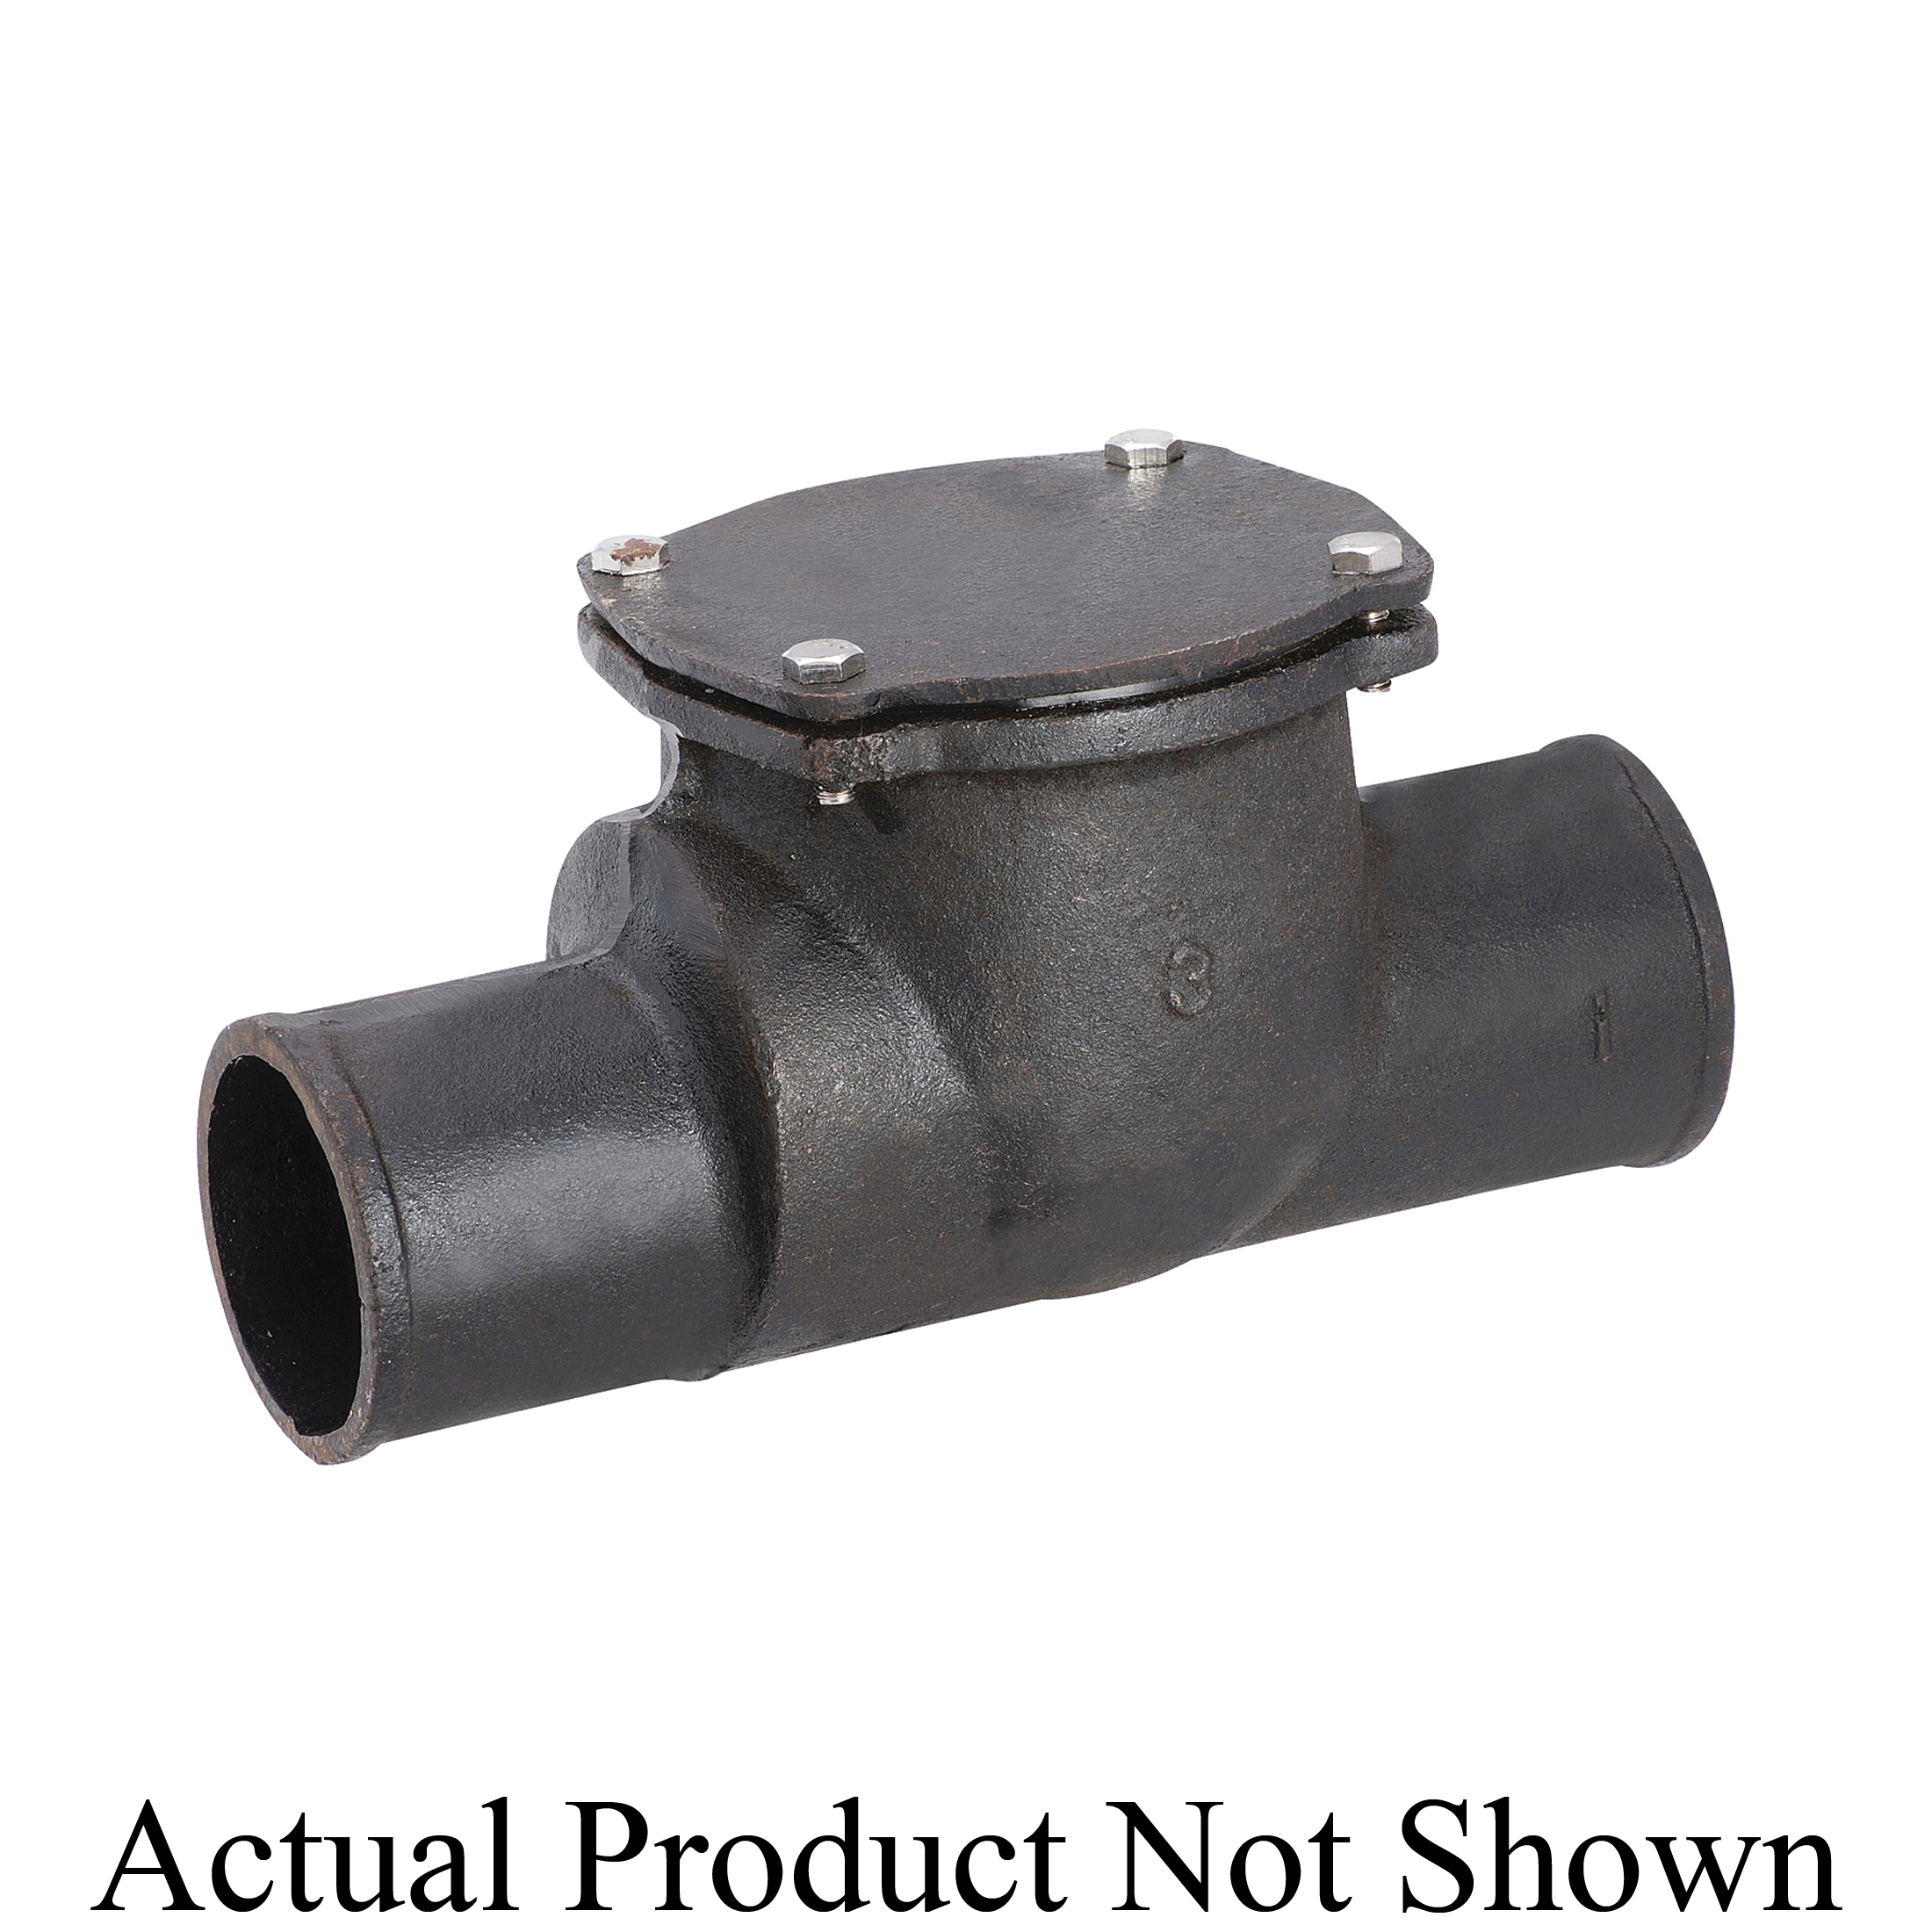 Matco-Norca™ CIBWV11 Backwater Valve Without Hub, 4 in Nominal, Cast Iron Body, Import